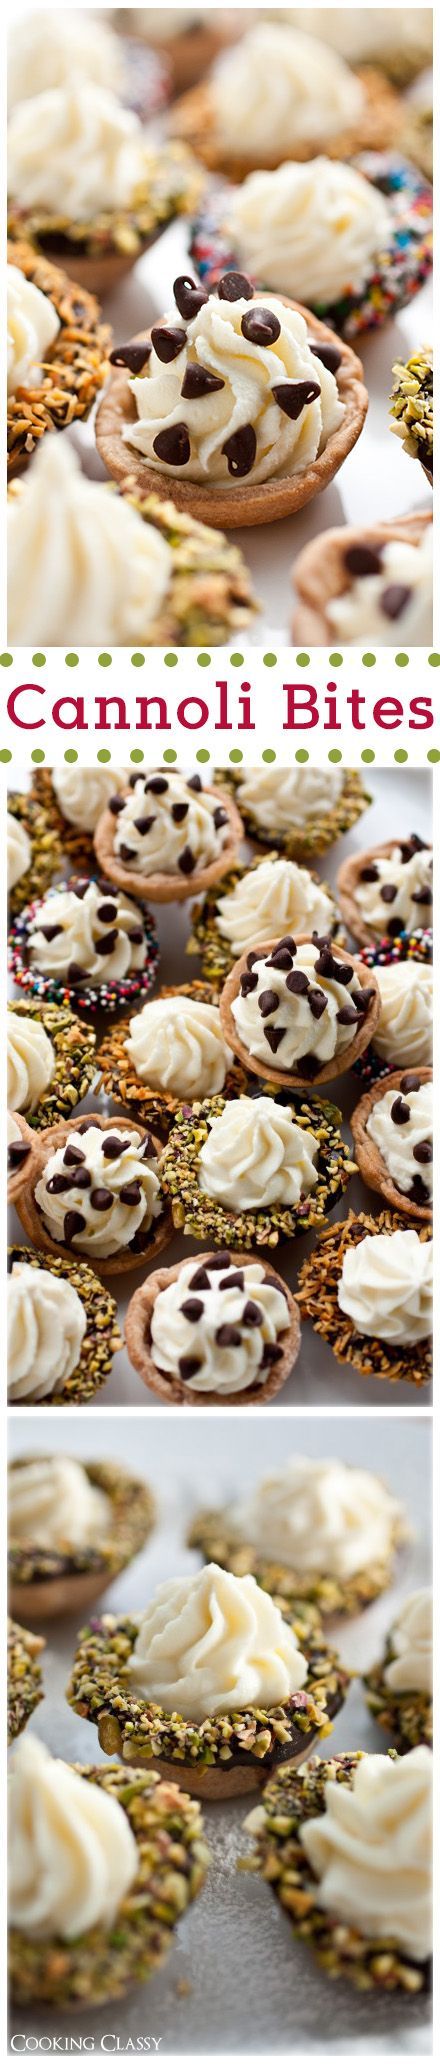 Cannoli Bites – these delicious bite size treats are perfect for parties! Loved these!